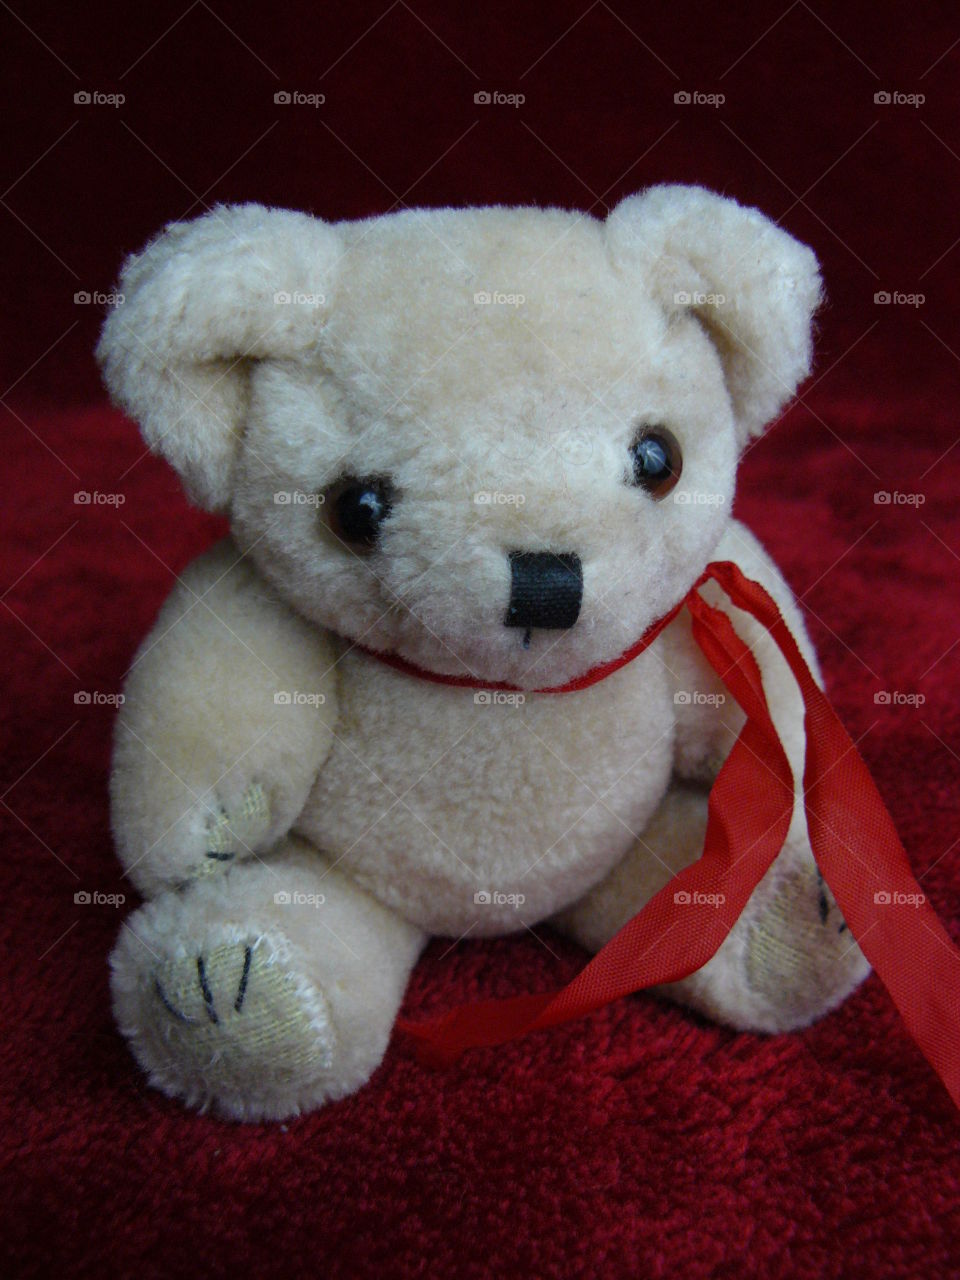 cute little teddy bear with black beady eyes and a bright red ribbon tied around neck like a scarf